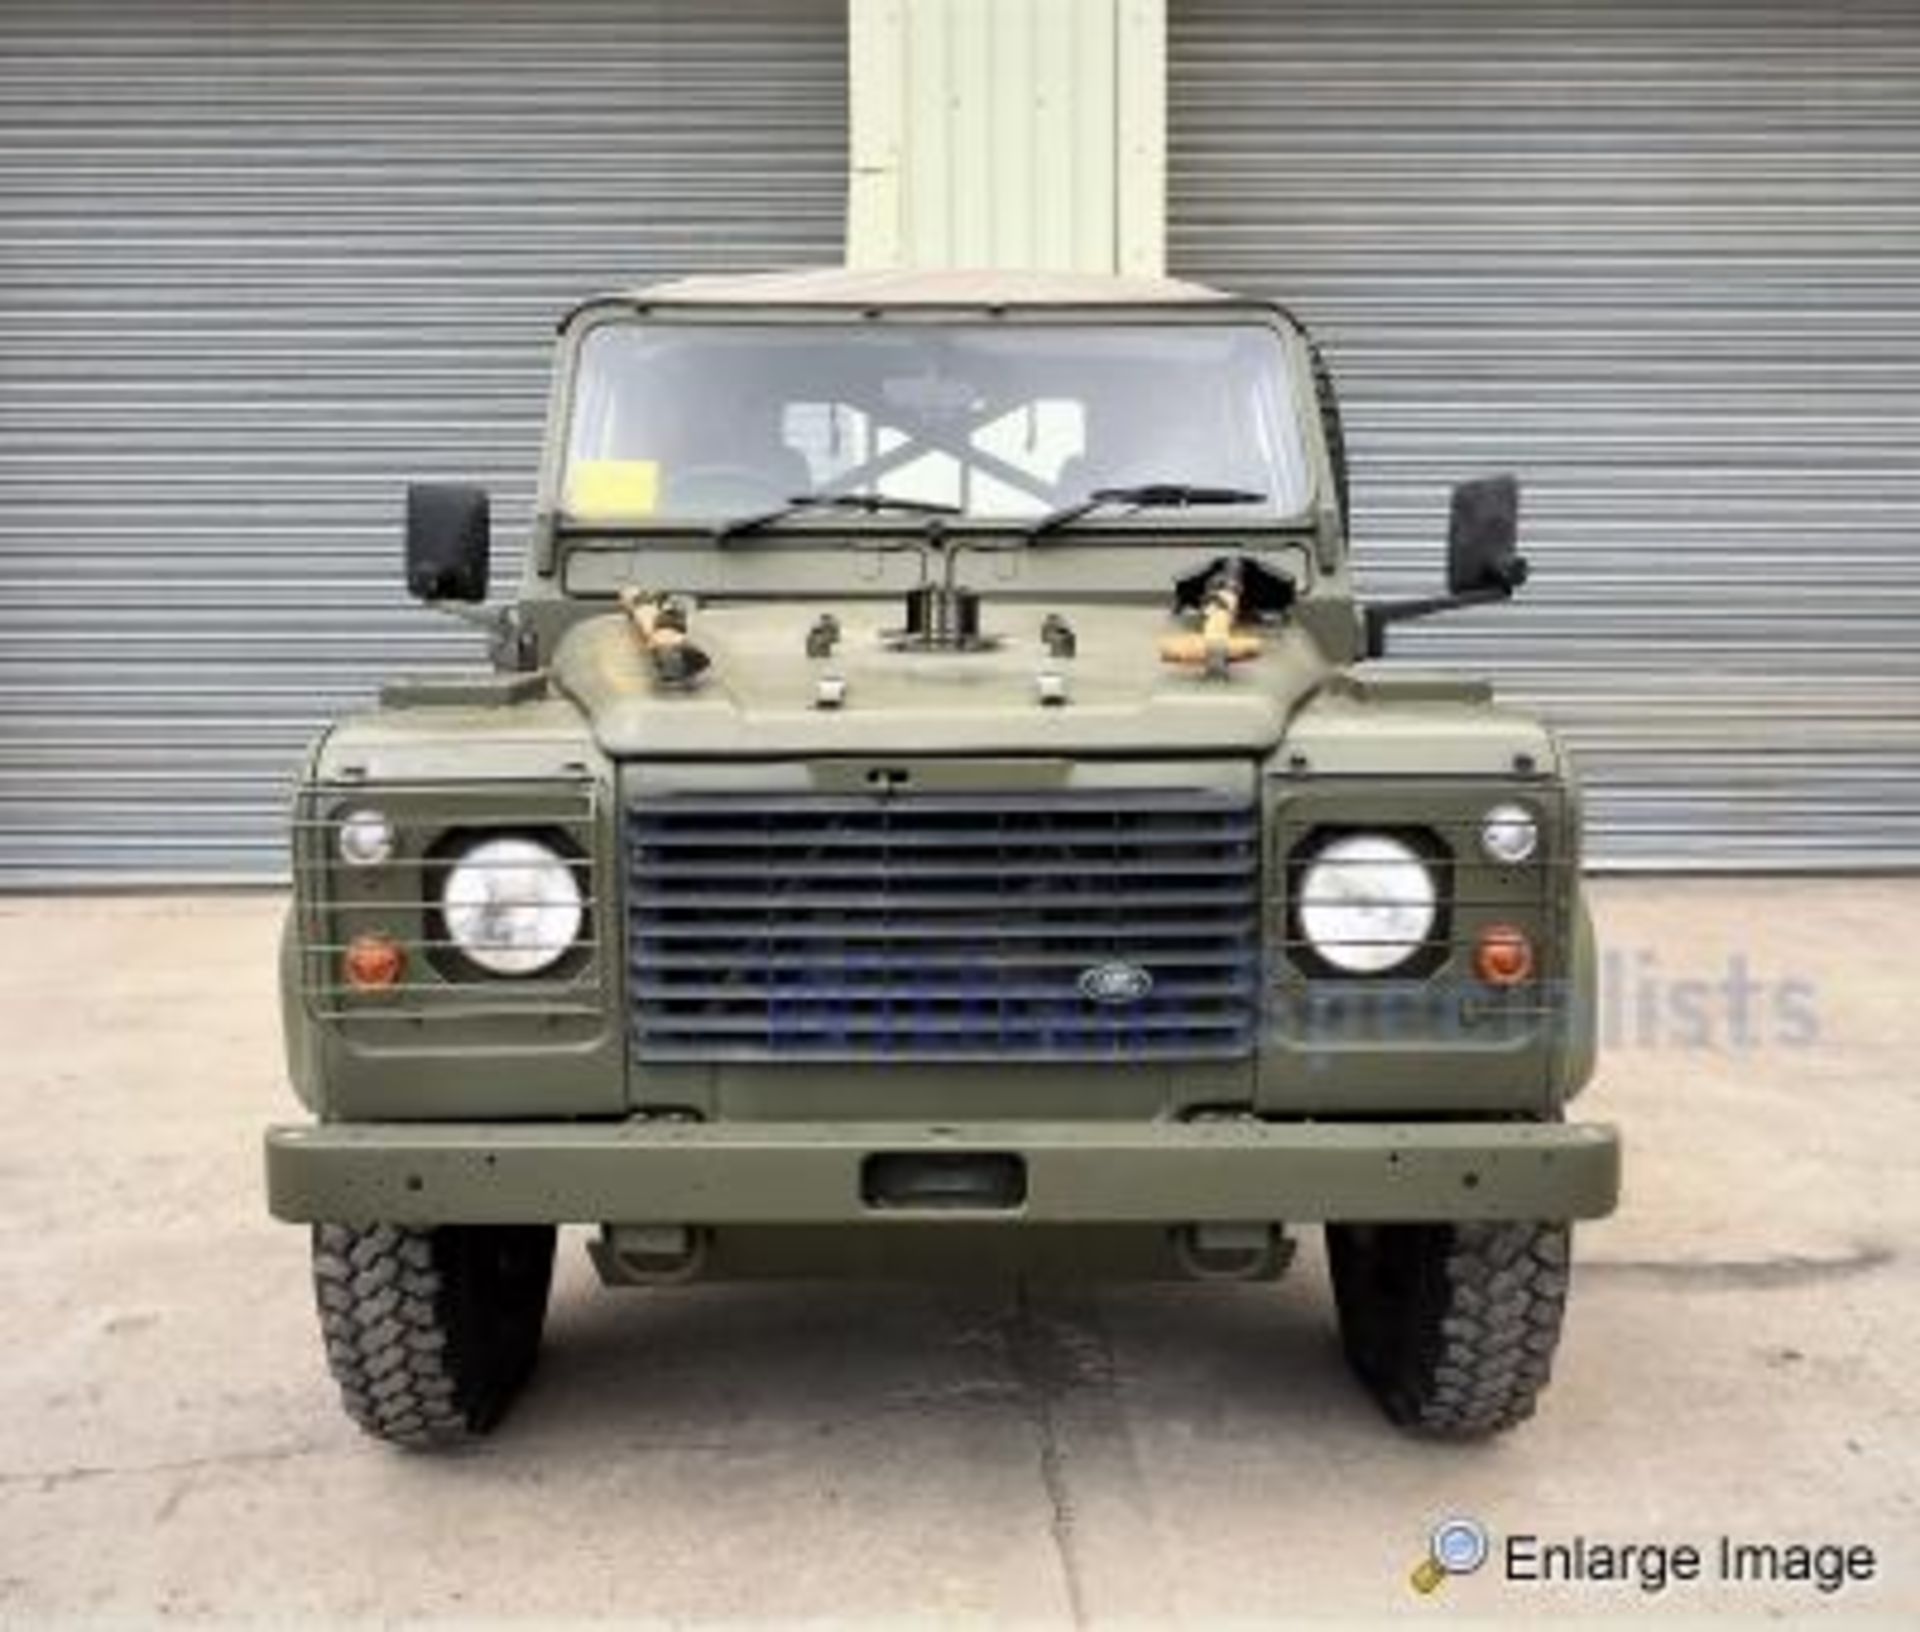 Rarely Available upgraded REMUS RHD Land Rover Wolf 90 300Tdi Soft Top - Image 2 of 21